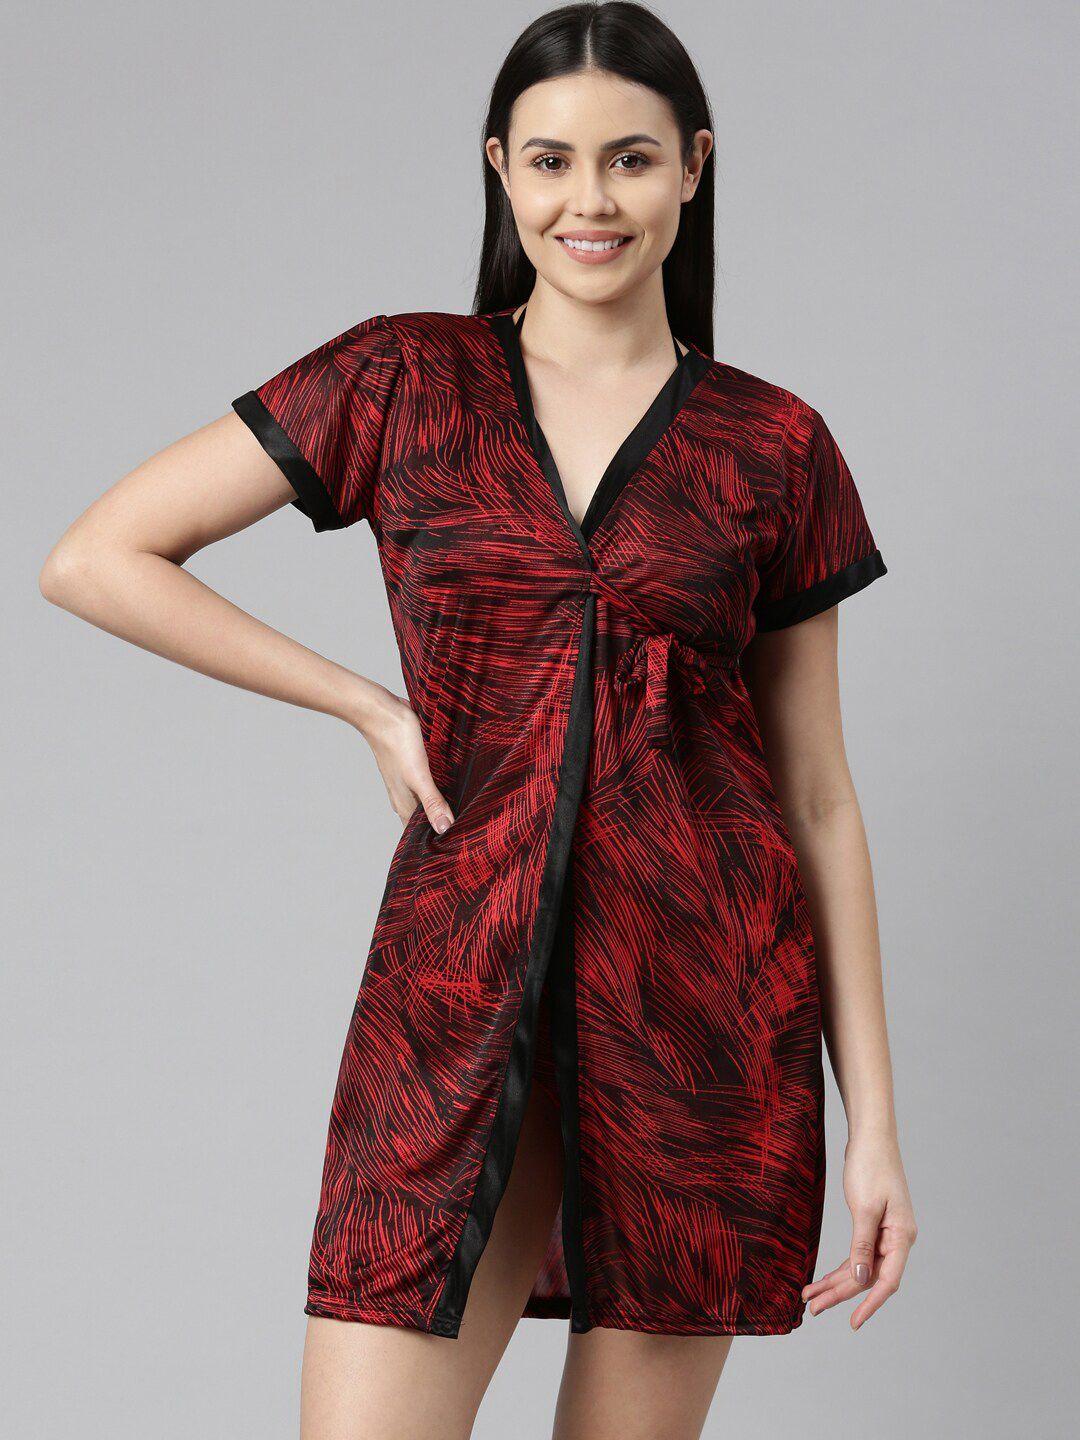 bailey sells red printed nightdress